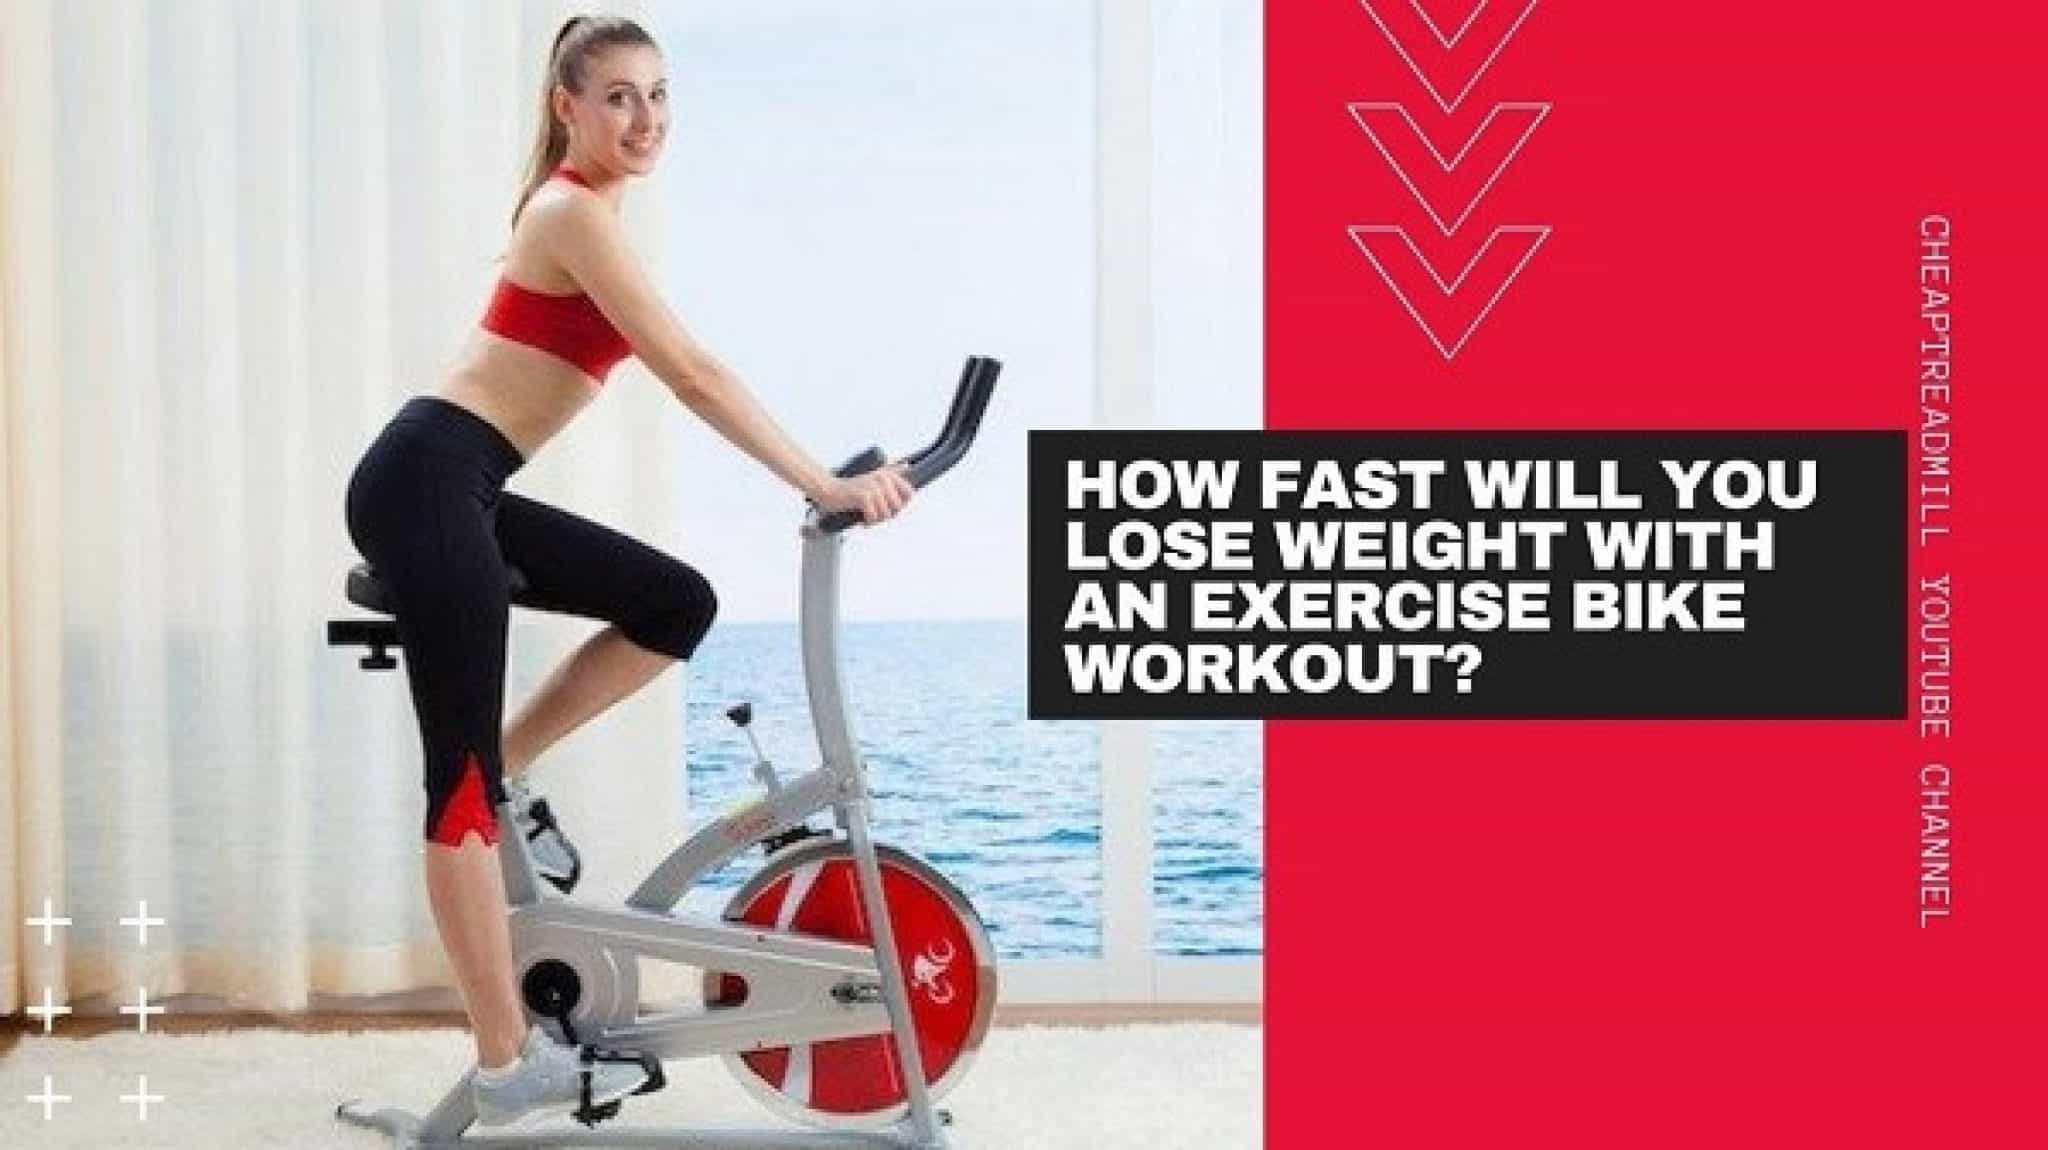 How Long Should You Ride a Stationary Bike to Lose Weight?